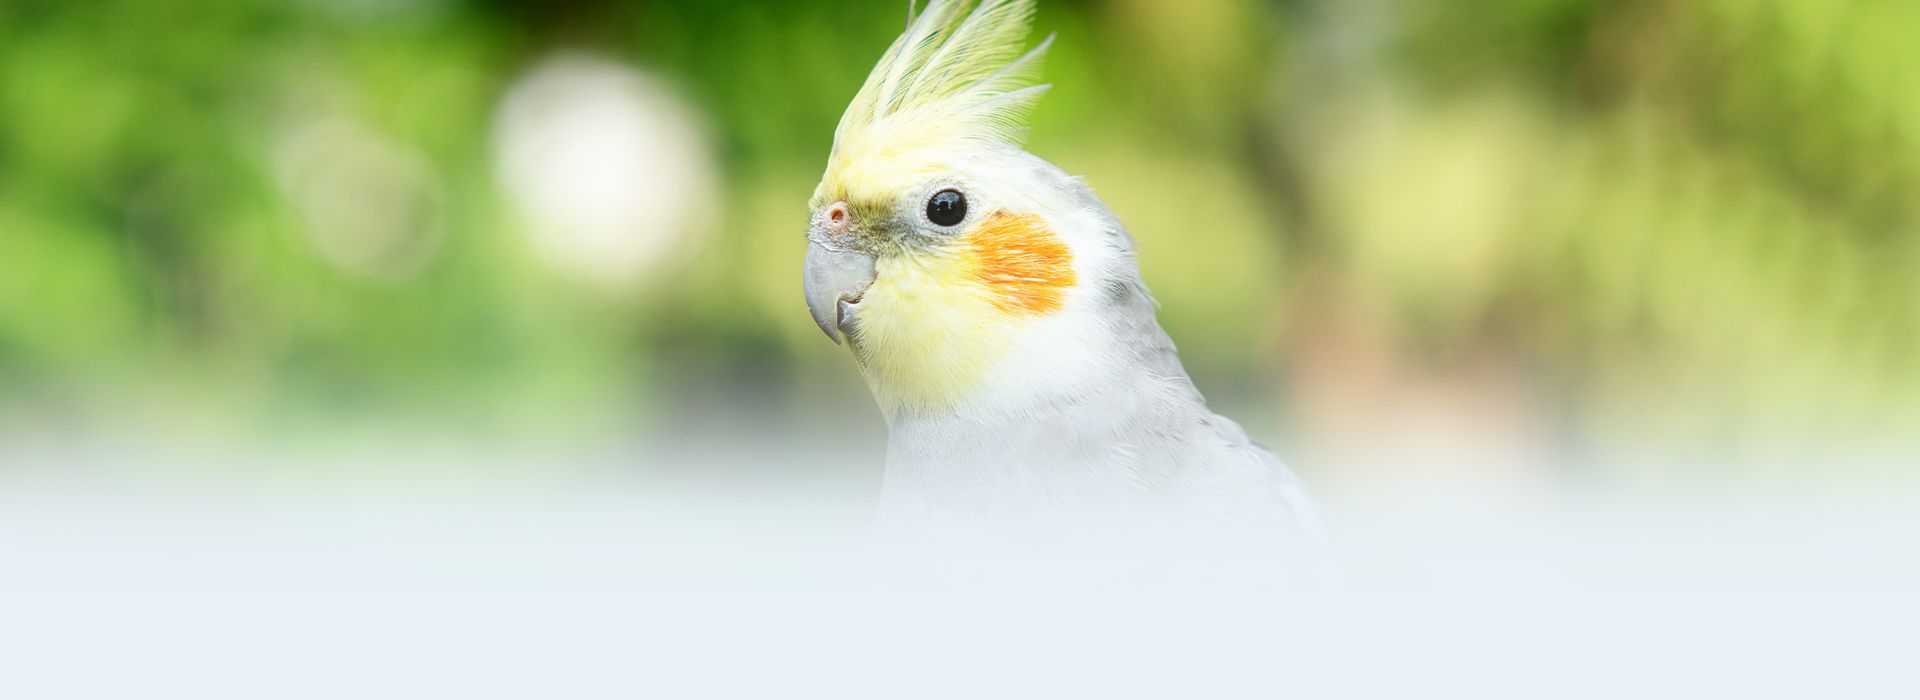 cockatoo parrot with blurry background